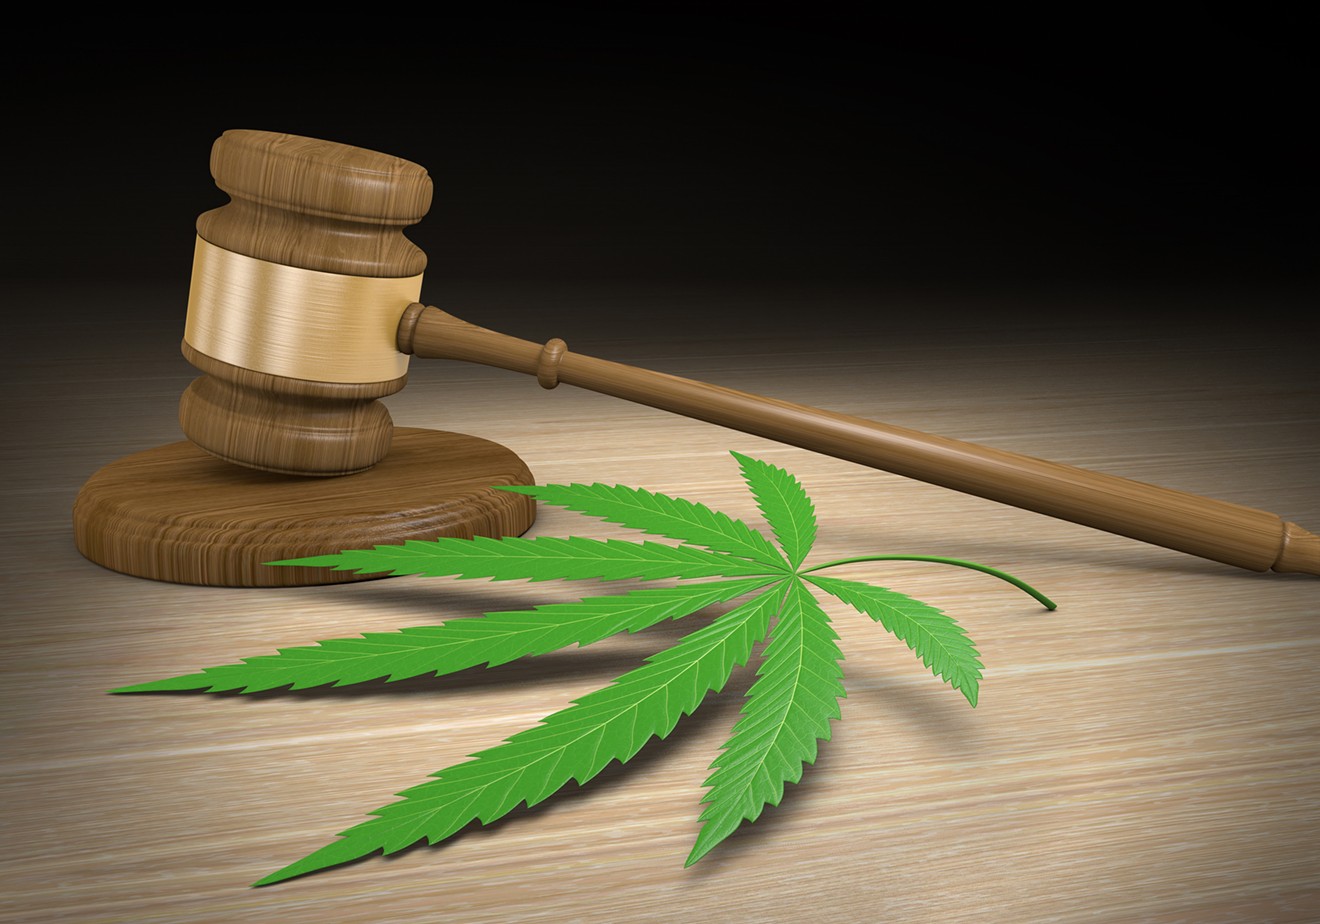 Authorities say Todd Smith tried pulling others into the hemp license scheme, but was unsuccessful.